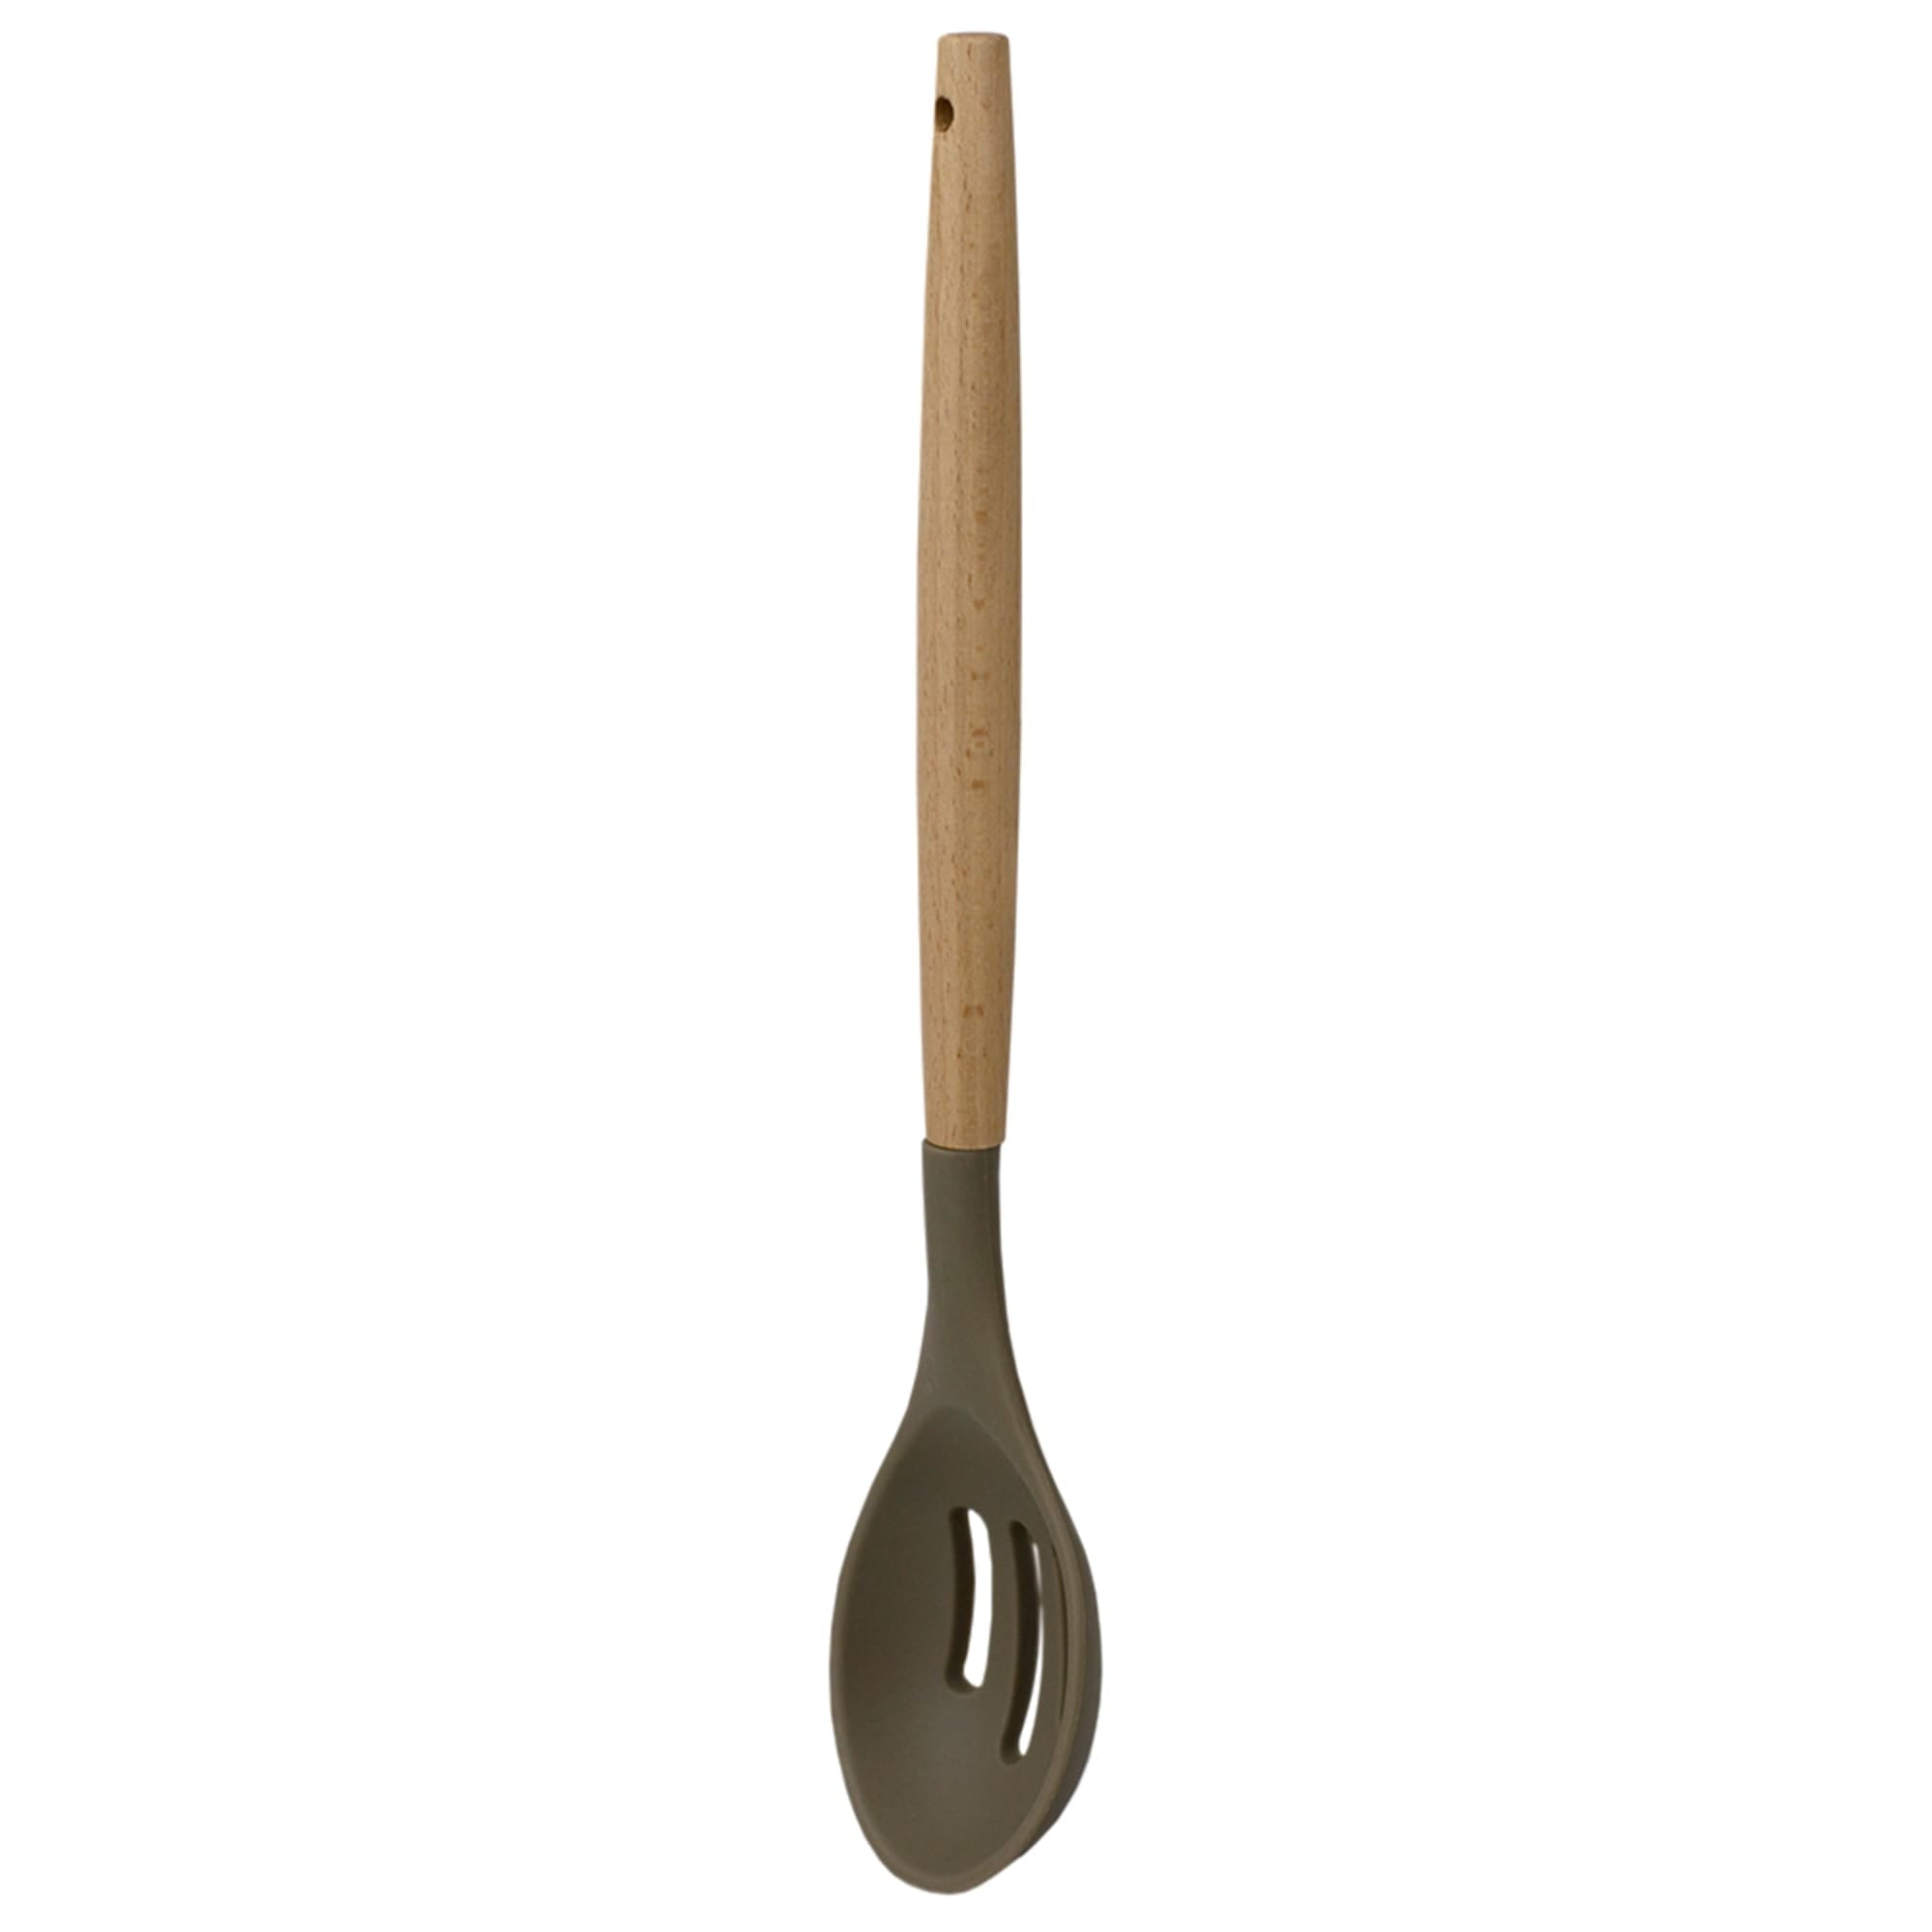 Home Basics Karina High-Heat Resistance Non-Stick Safe Silicone Slotted Spoon with Easy Grip Beech Wood Handle, Grey $2.50 EACH, CASE PACK OF 24